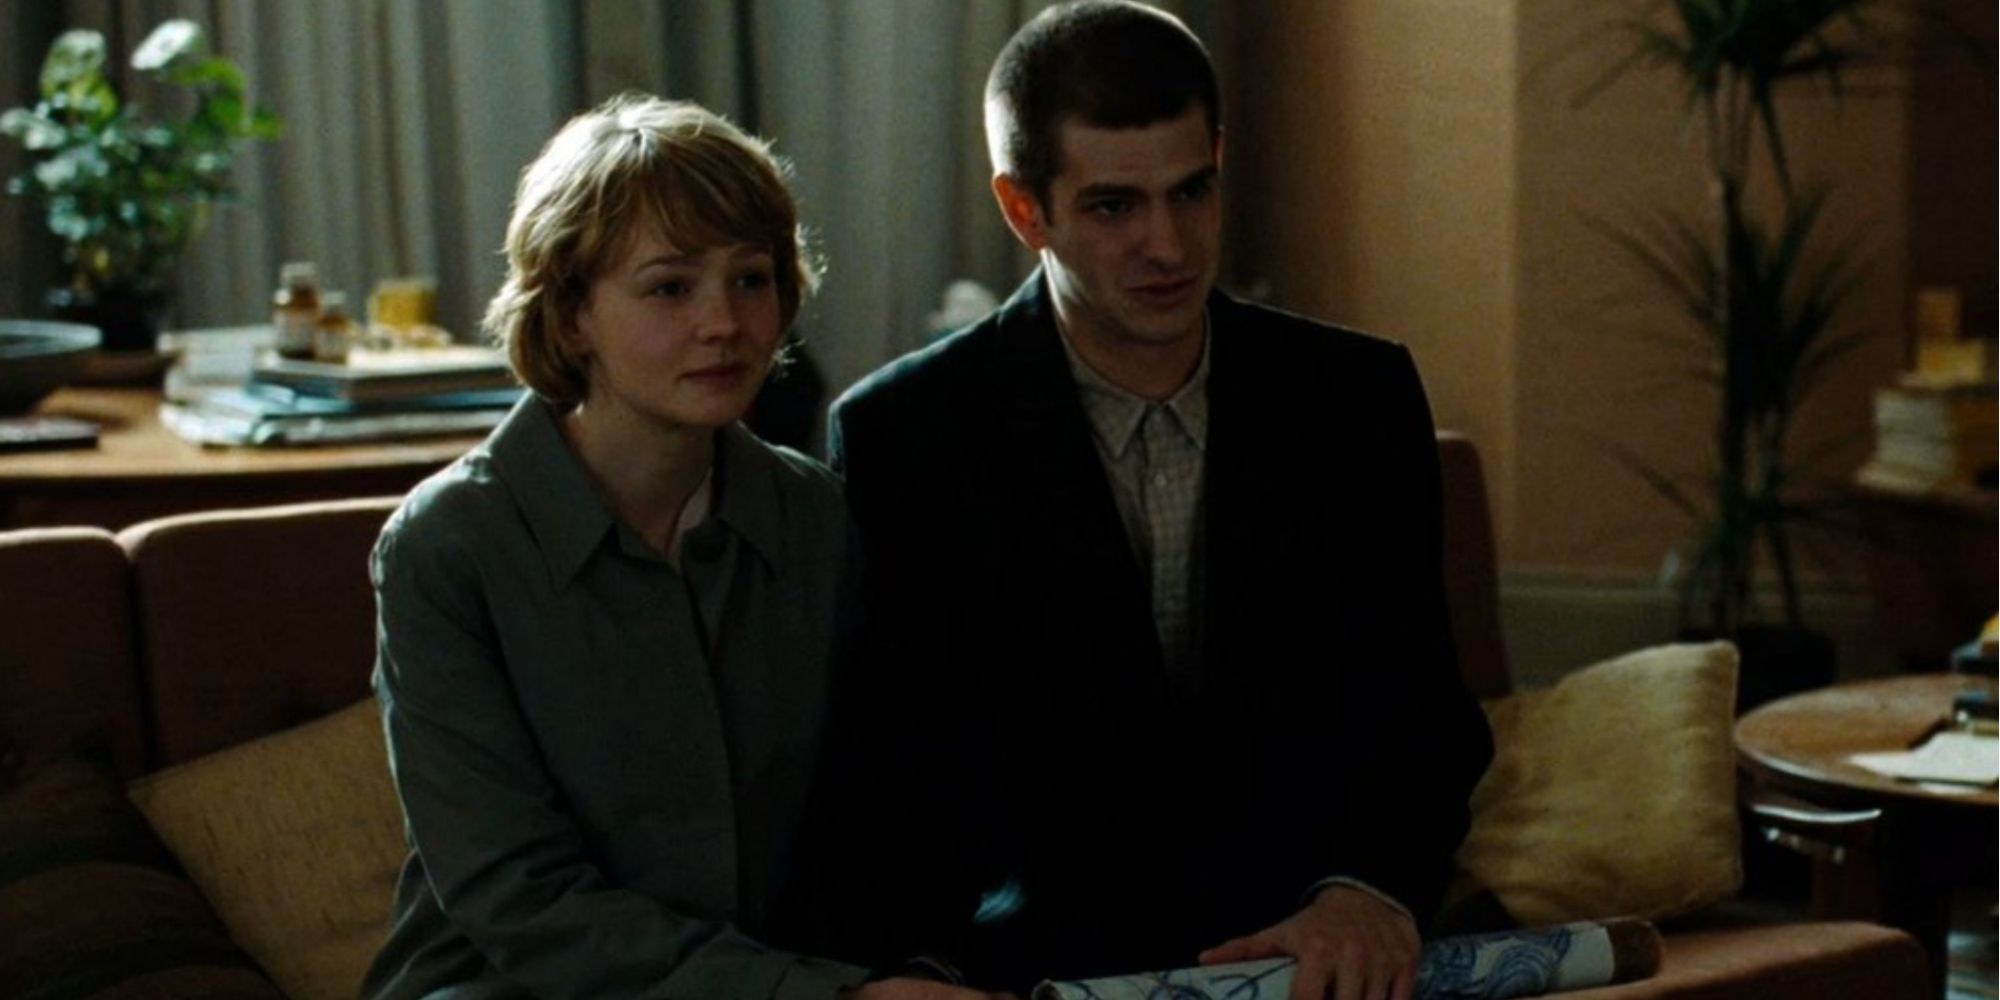 Never Let Me Go is a brutally tragic love story about clones